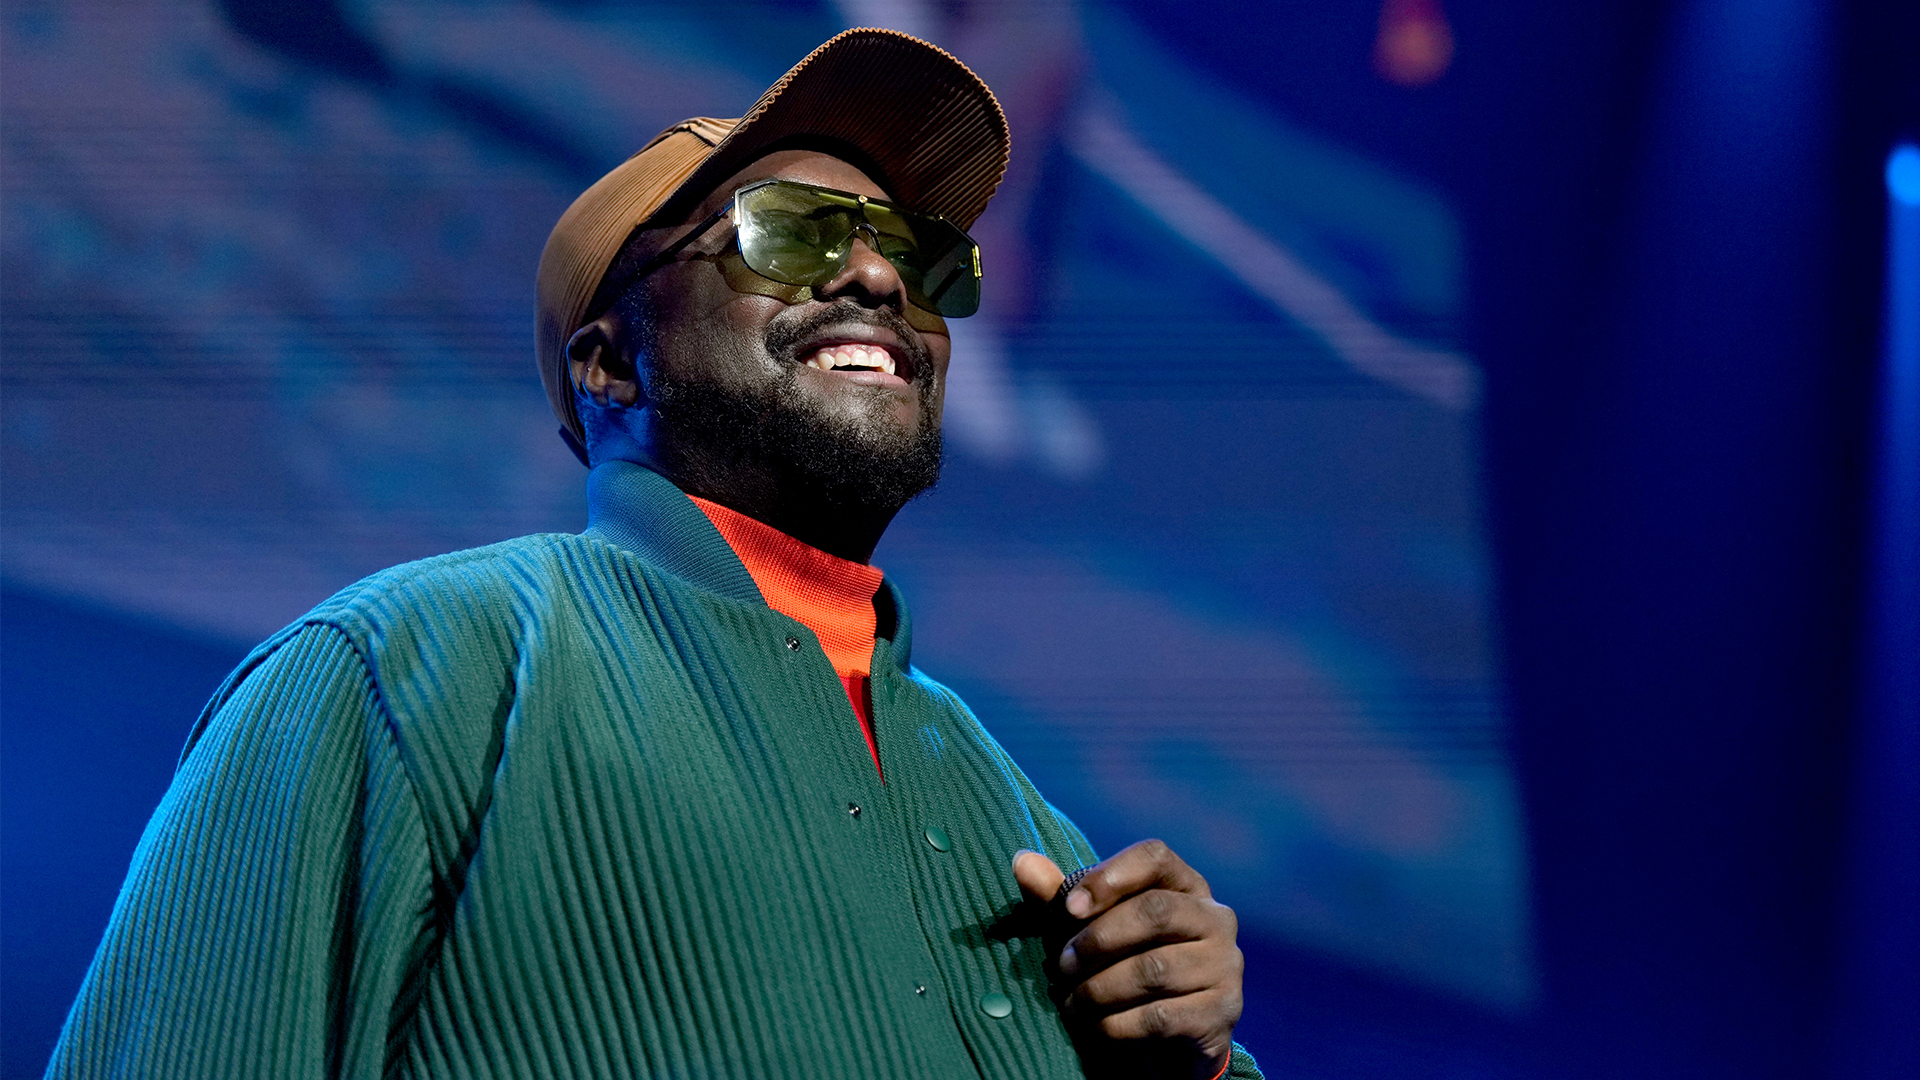 Will.i.am Is Part Of A Private Investment Group With A Stake In Companies Having Multibillion-Dollar Valuations